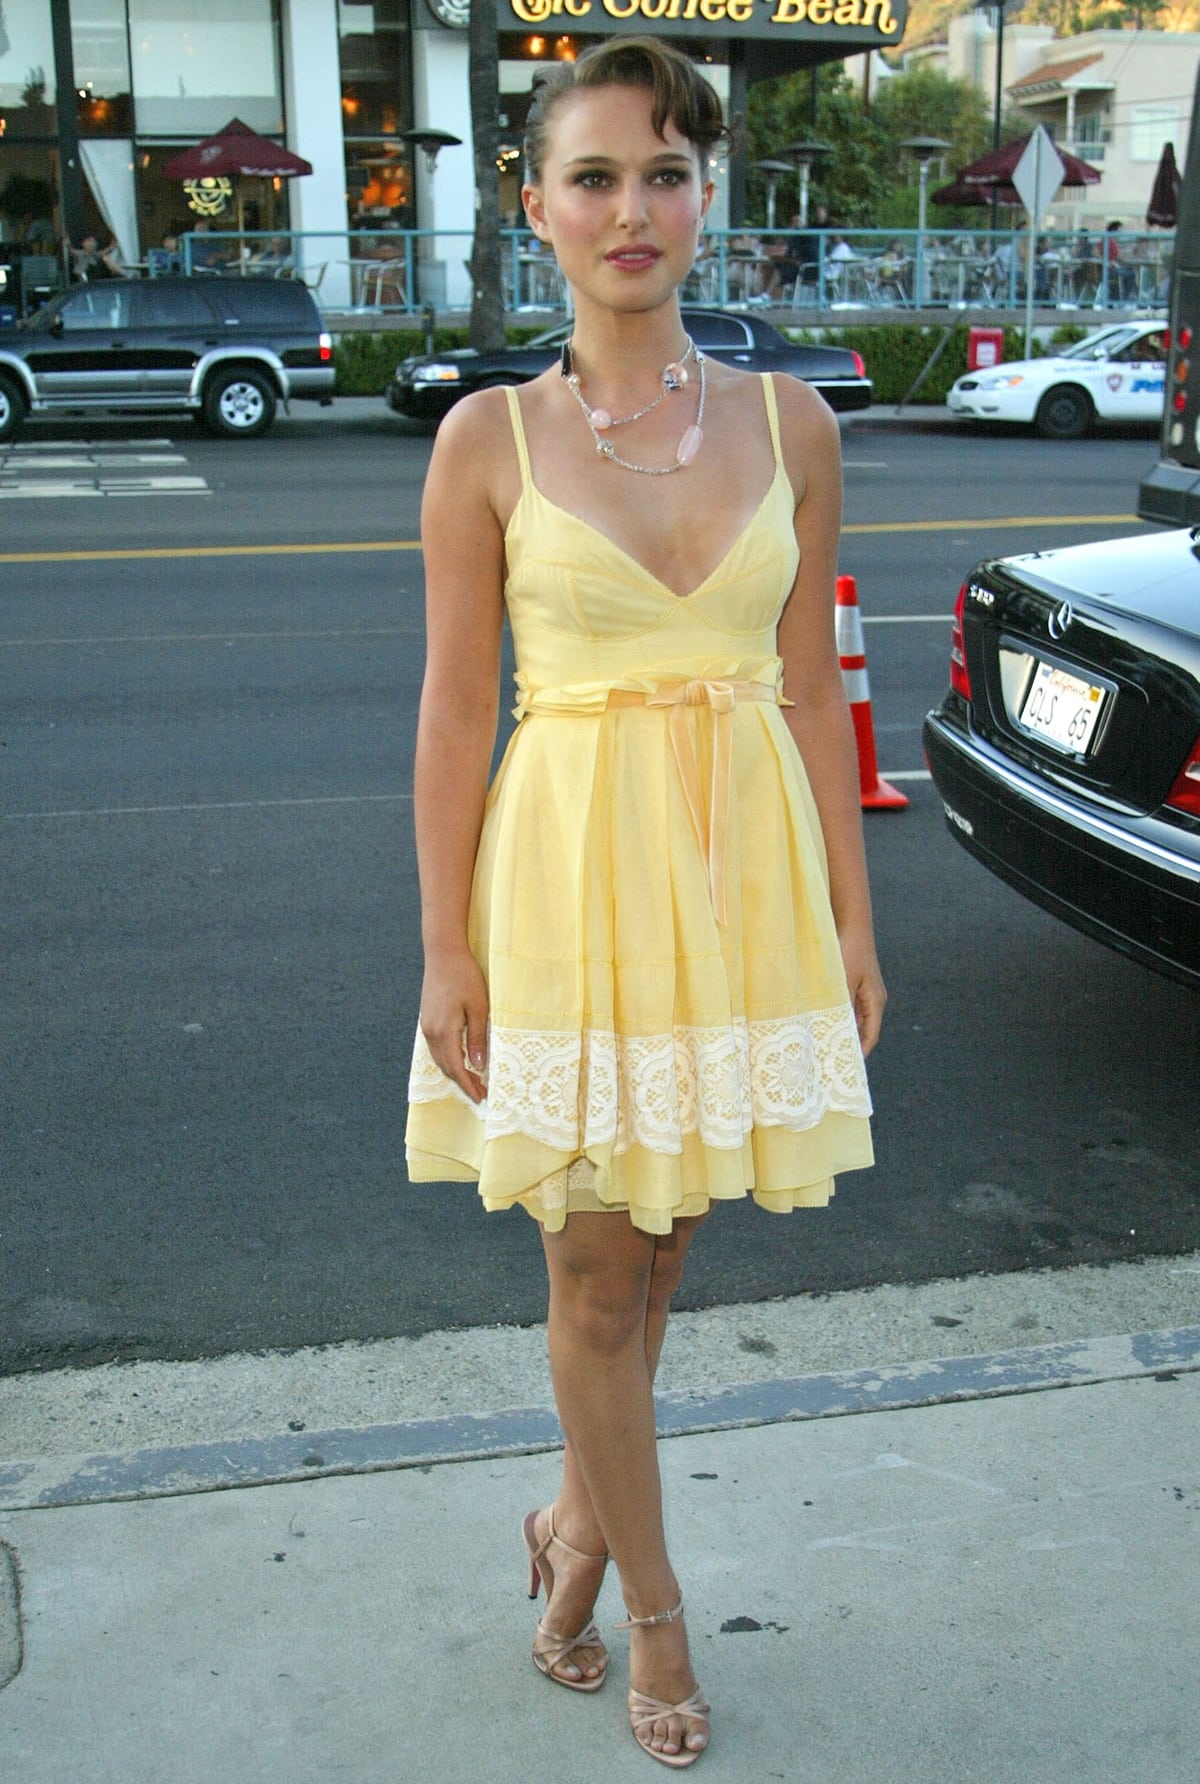 Natalie Portman flaunts her legs in a yellow dress at the premiere of 'Garden State' at Directors Guild of America